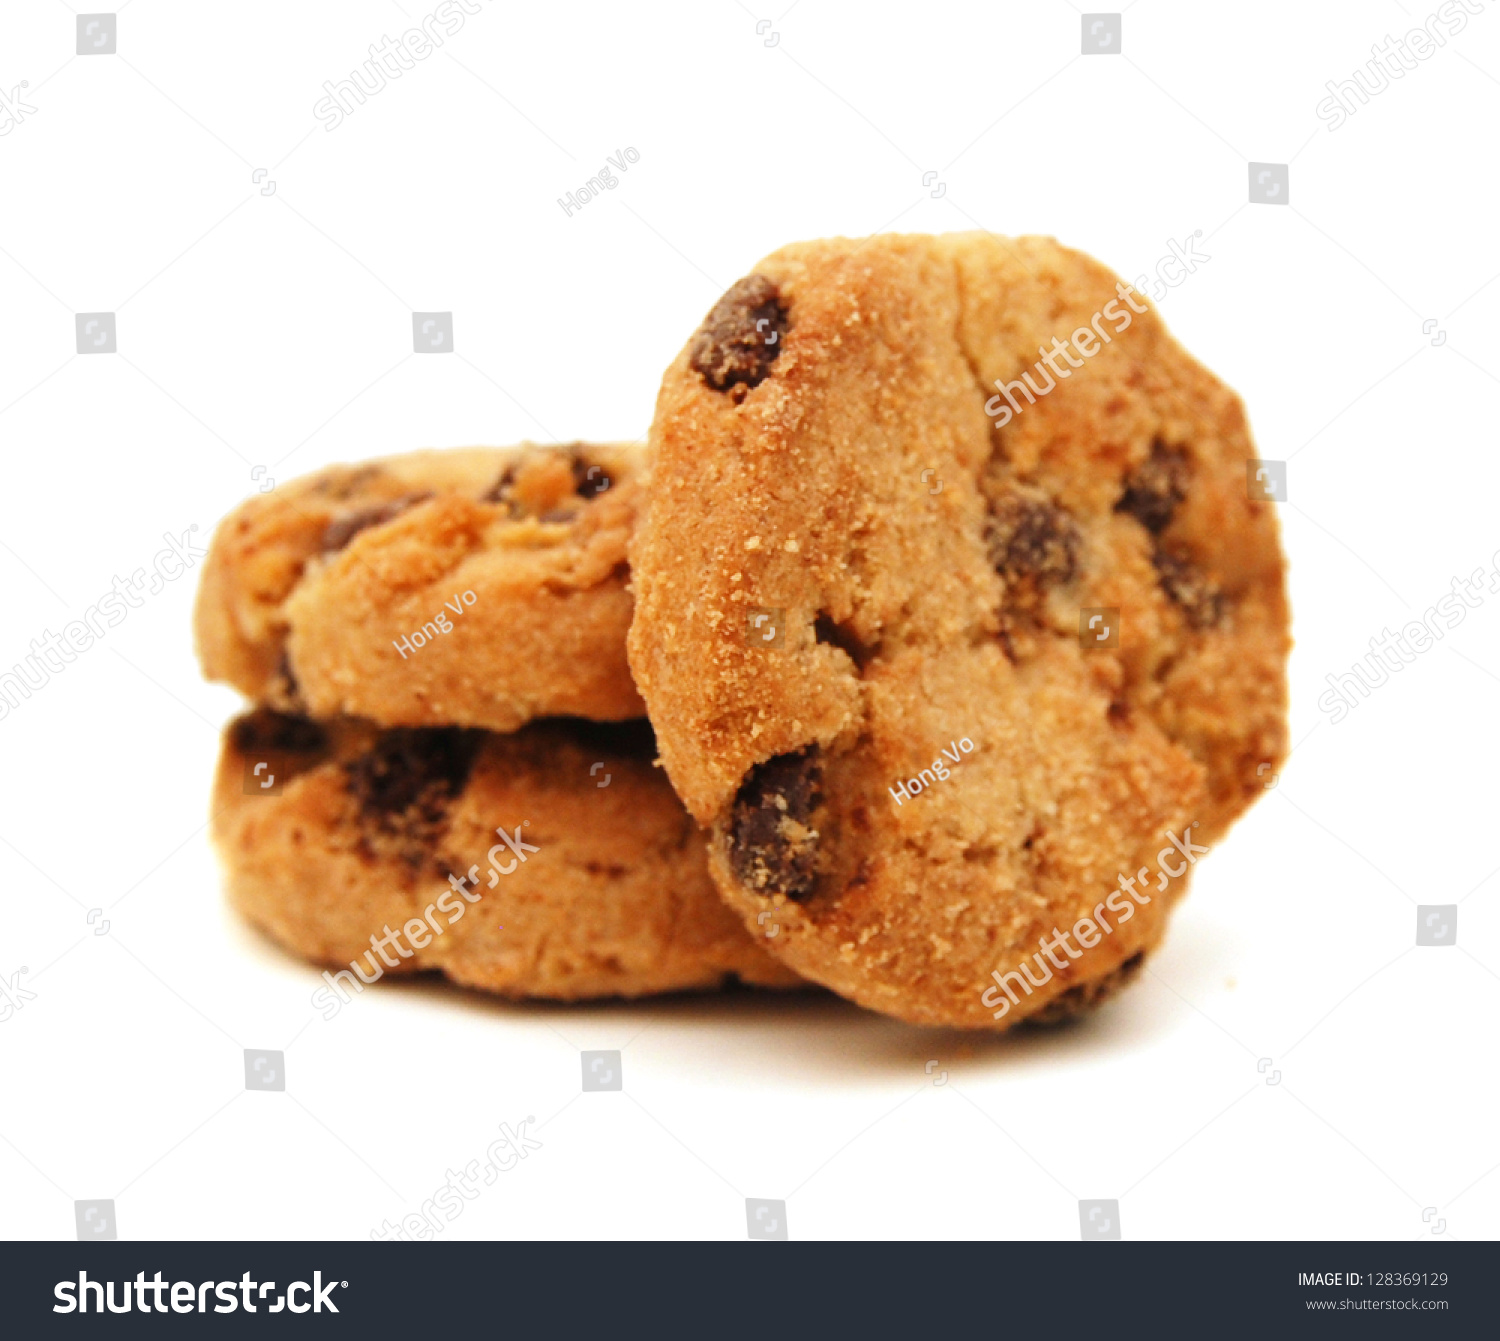 Extreme close-up image of chocolate chips cookies #128369129